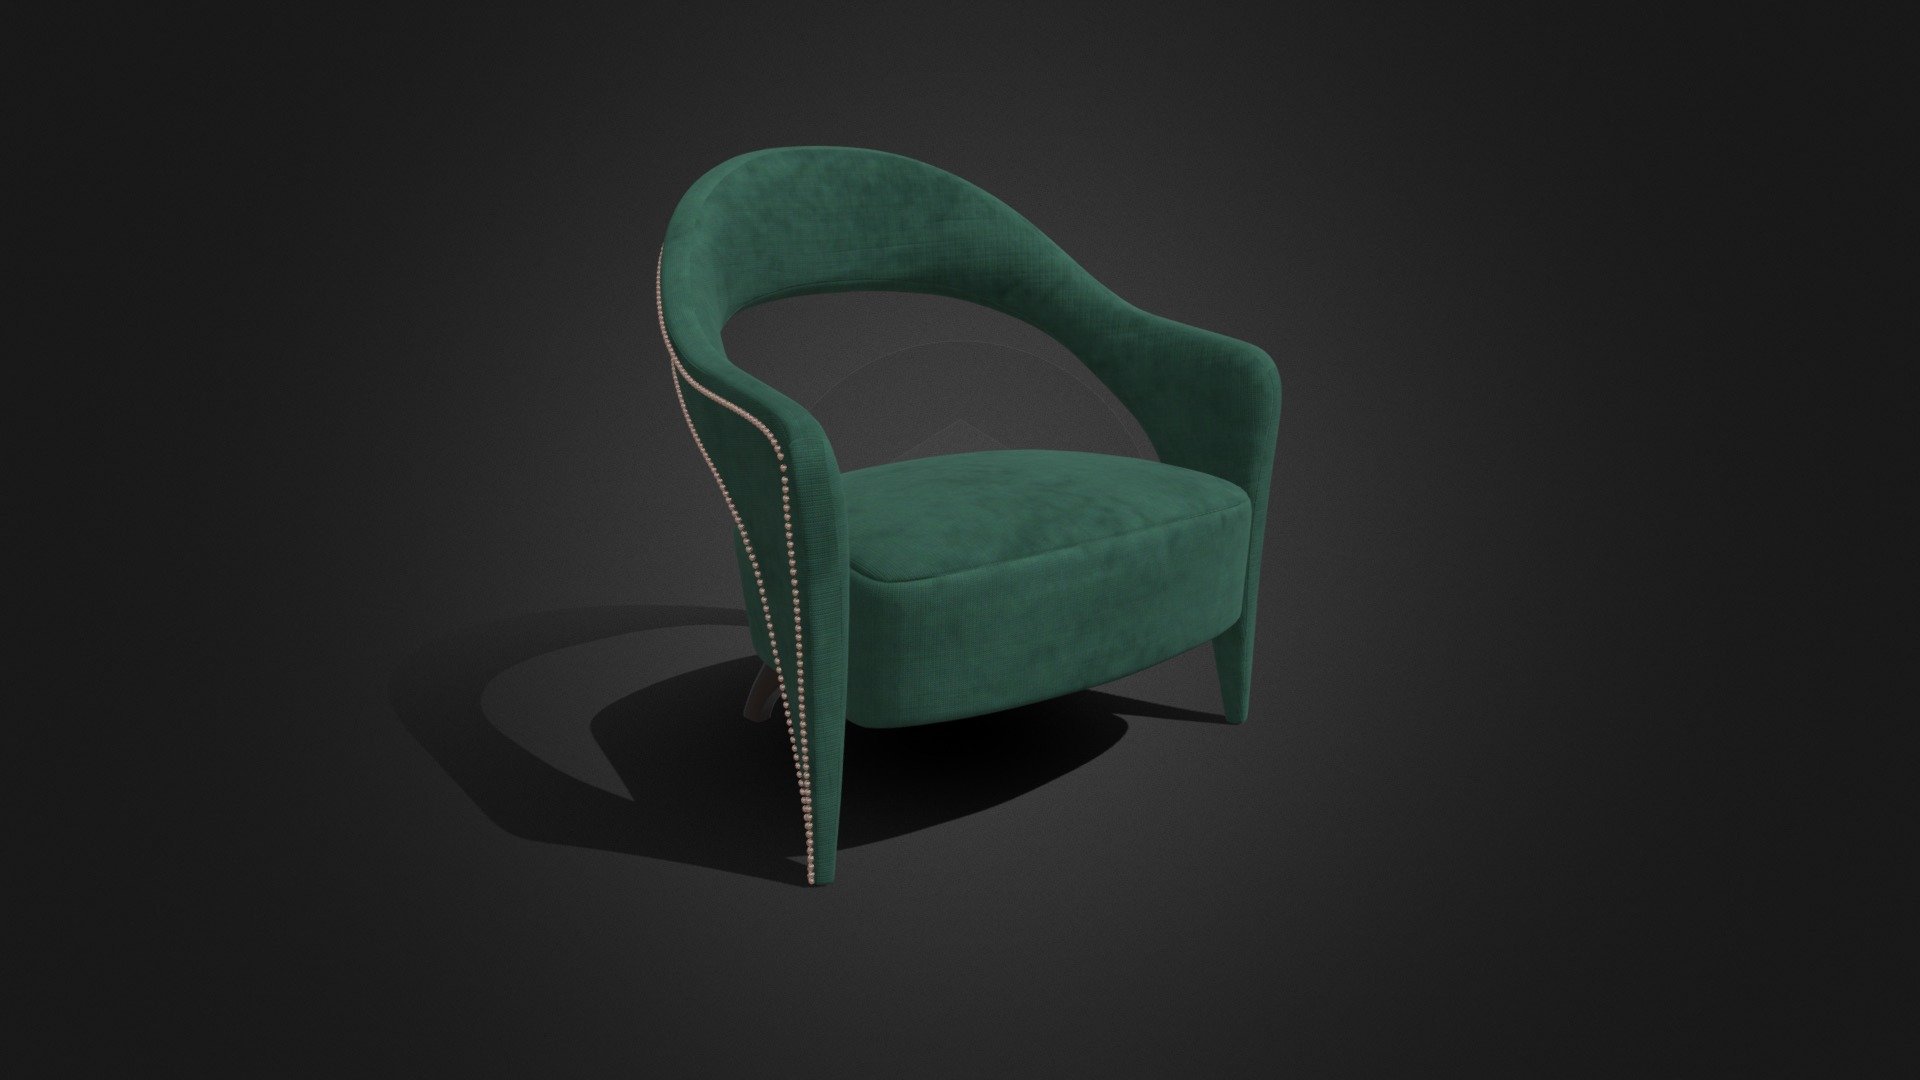 3d model of a Tellus armchair by Brabbu. (PBR texture )

This product is made in Blender and ready to render in Cycle. Unit setup is metres and the models are scaled to match real life objects. 

The model comes with textures and materials and is positioned in the center of the coordinates system.


No additional plugin is needed to open the model.




Notes:



Geometry: Polygonal

Textures: Yes 

Rigged: No

Animated: No

UV Mapped: Yes

Unwrapped UVs: Yes, non-overlapping


Bake normal map




Note: don't forget to take a few seconds to rate this product, your support will allow me to continue working .
Thanks in advance for your help and happy blending!




Hope you like it! Thank you!



My youtube channel : https://www.youtube.com/toss90 - Tellus Armchair By Brabbu - Buy Royalty Free 3D model by Toss90 3d model